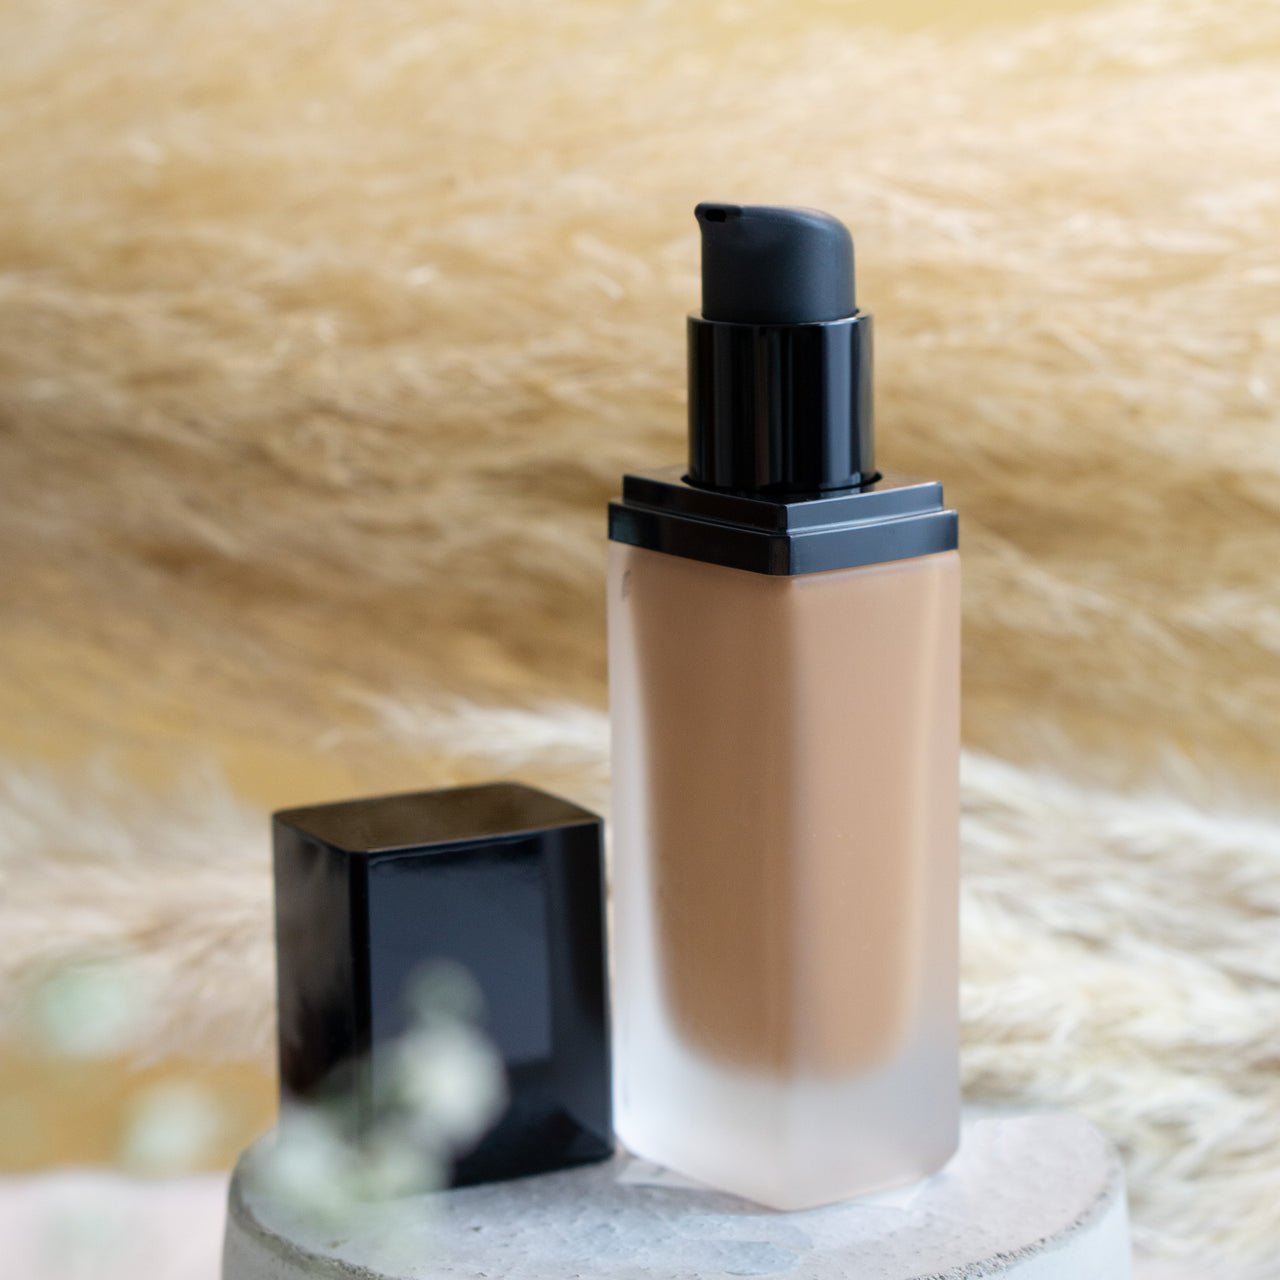 Mjae Foundation with SPF - Rich Caramel - Clean Beauty